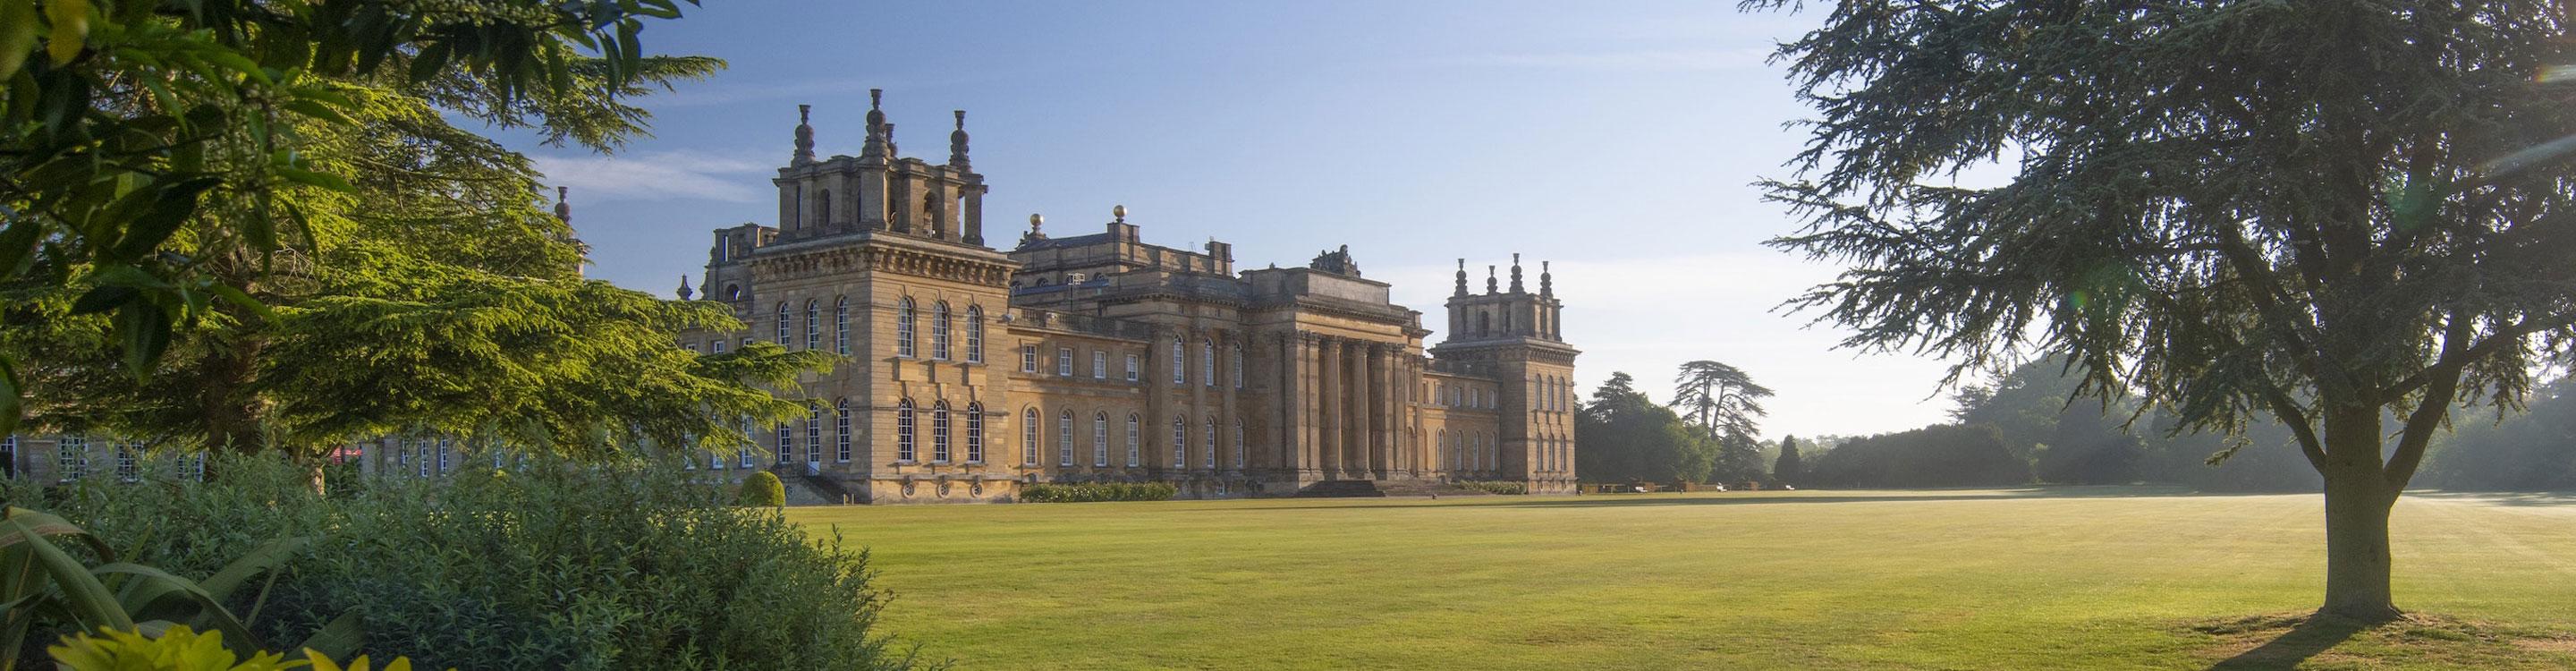 Exterior of Blenheim Palace, Great Britain, in the sun